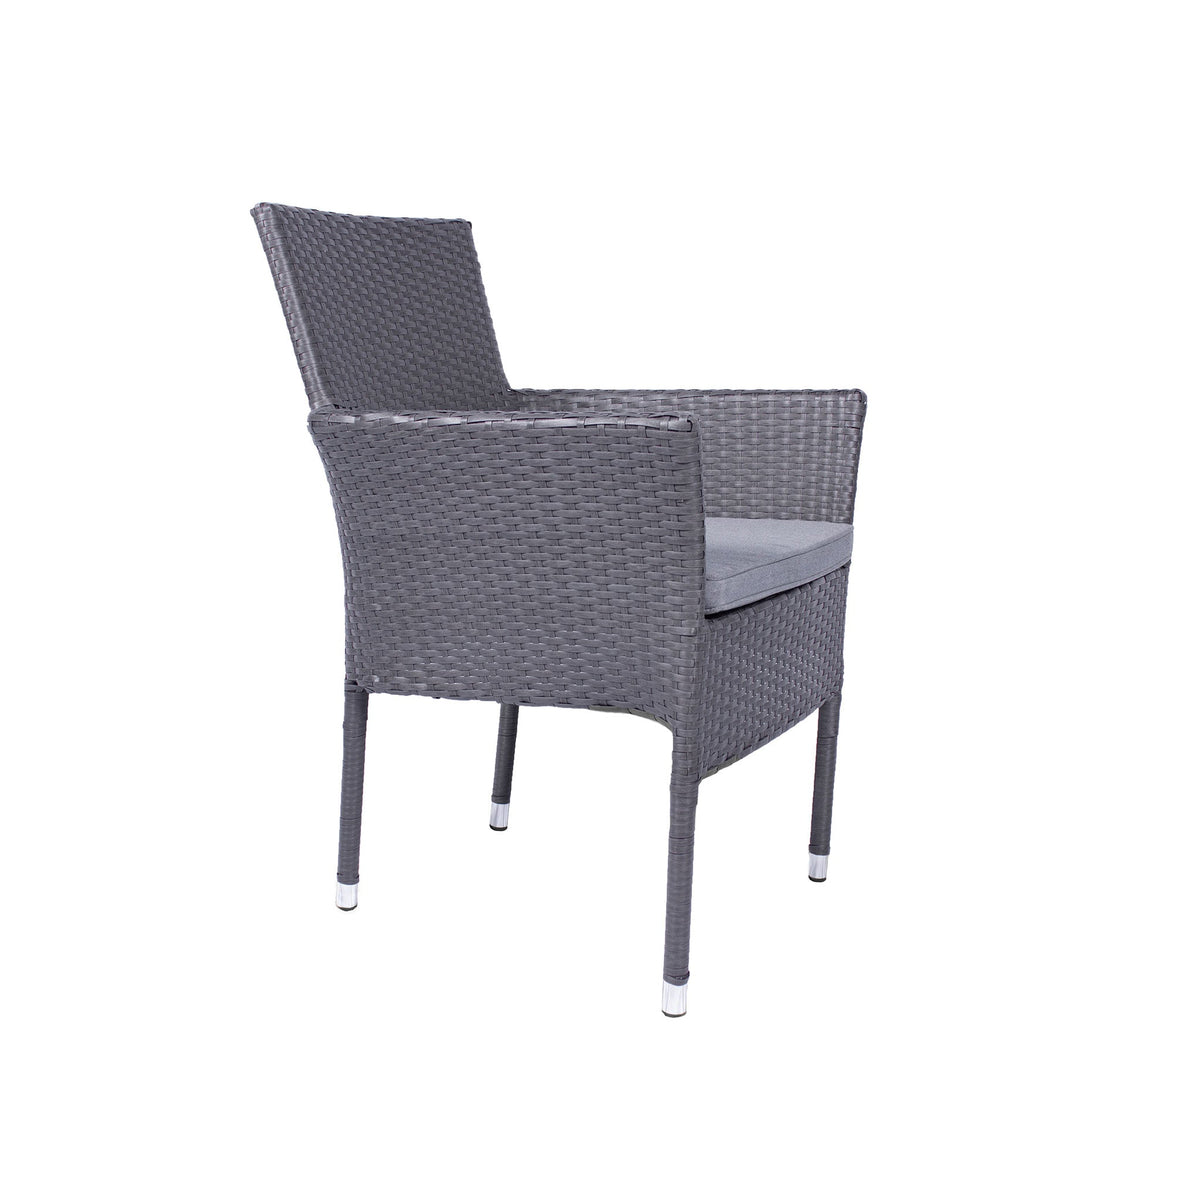 Malaga 4 Seat Deluxe Stacking 110cm Rattan Dining Set Armchair